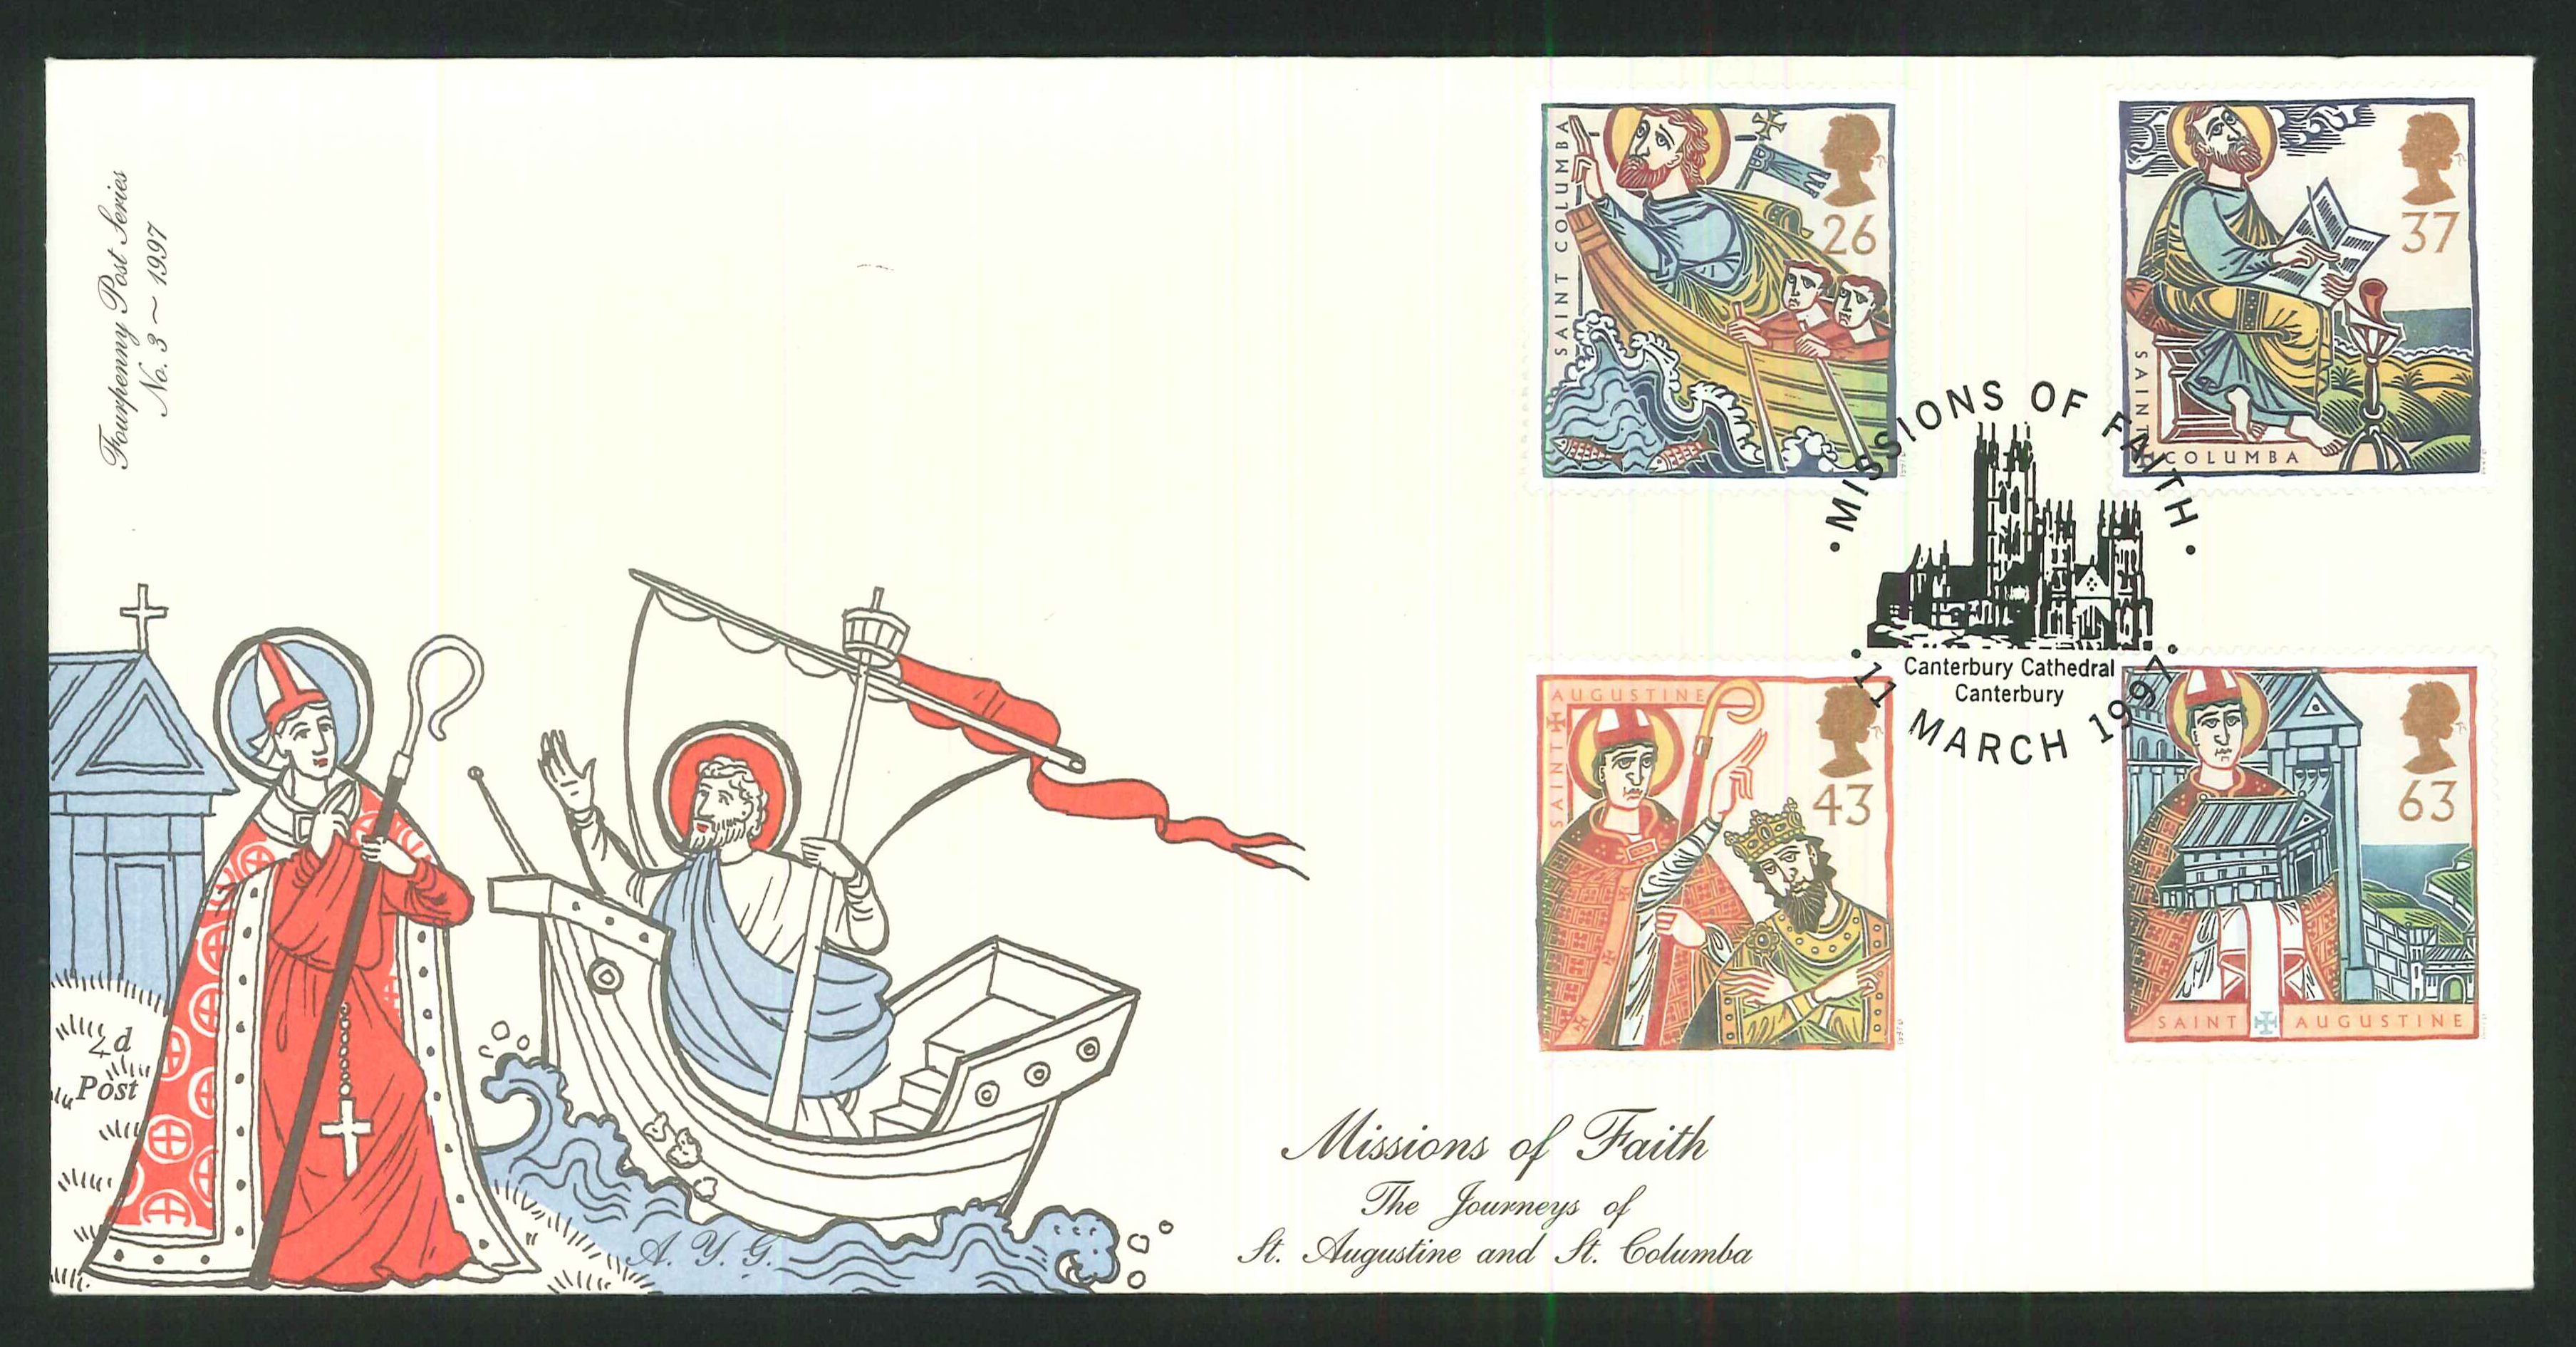 1997 - Missions of Faith, First Day Cover - Canterbury Cathedral Postmark